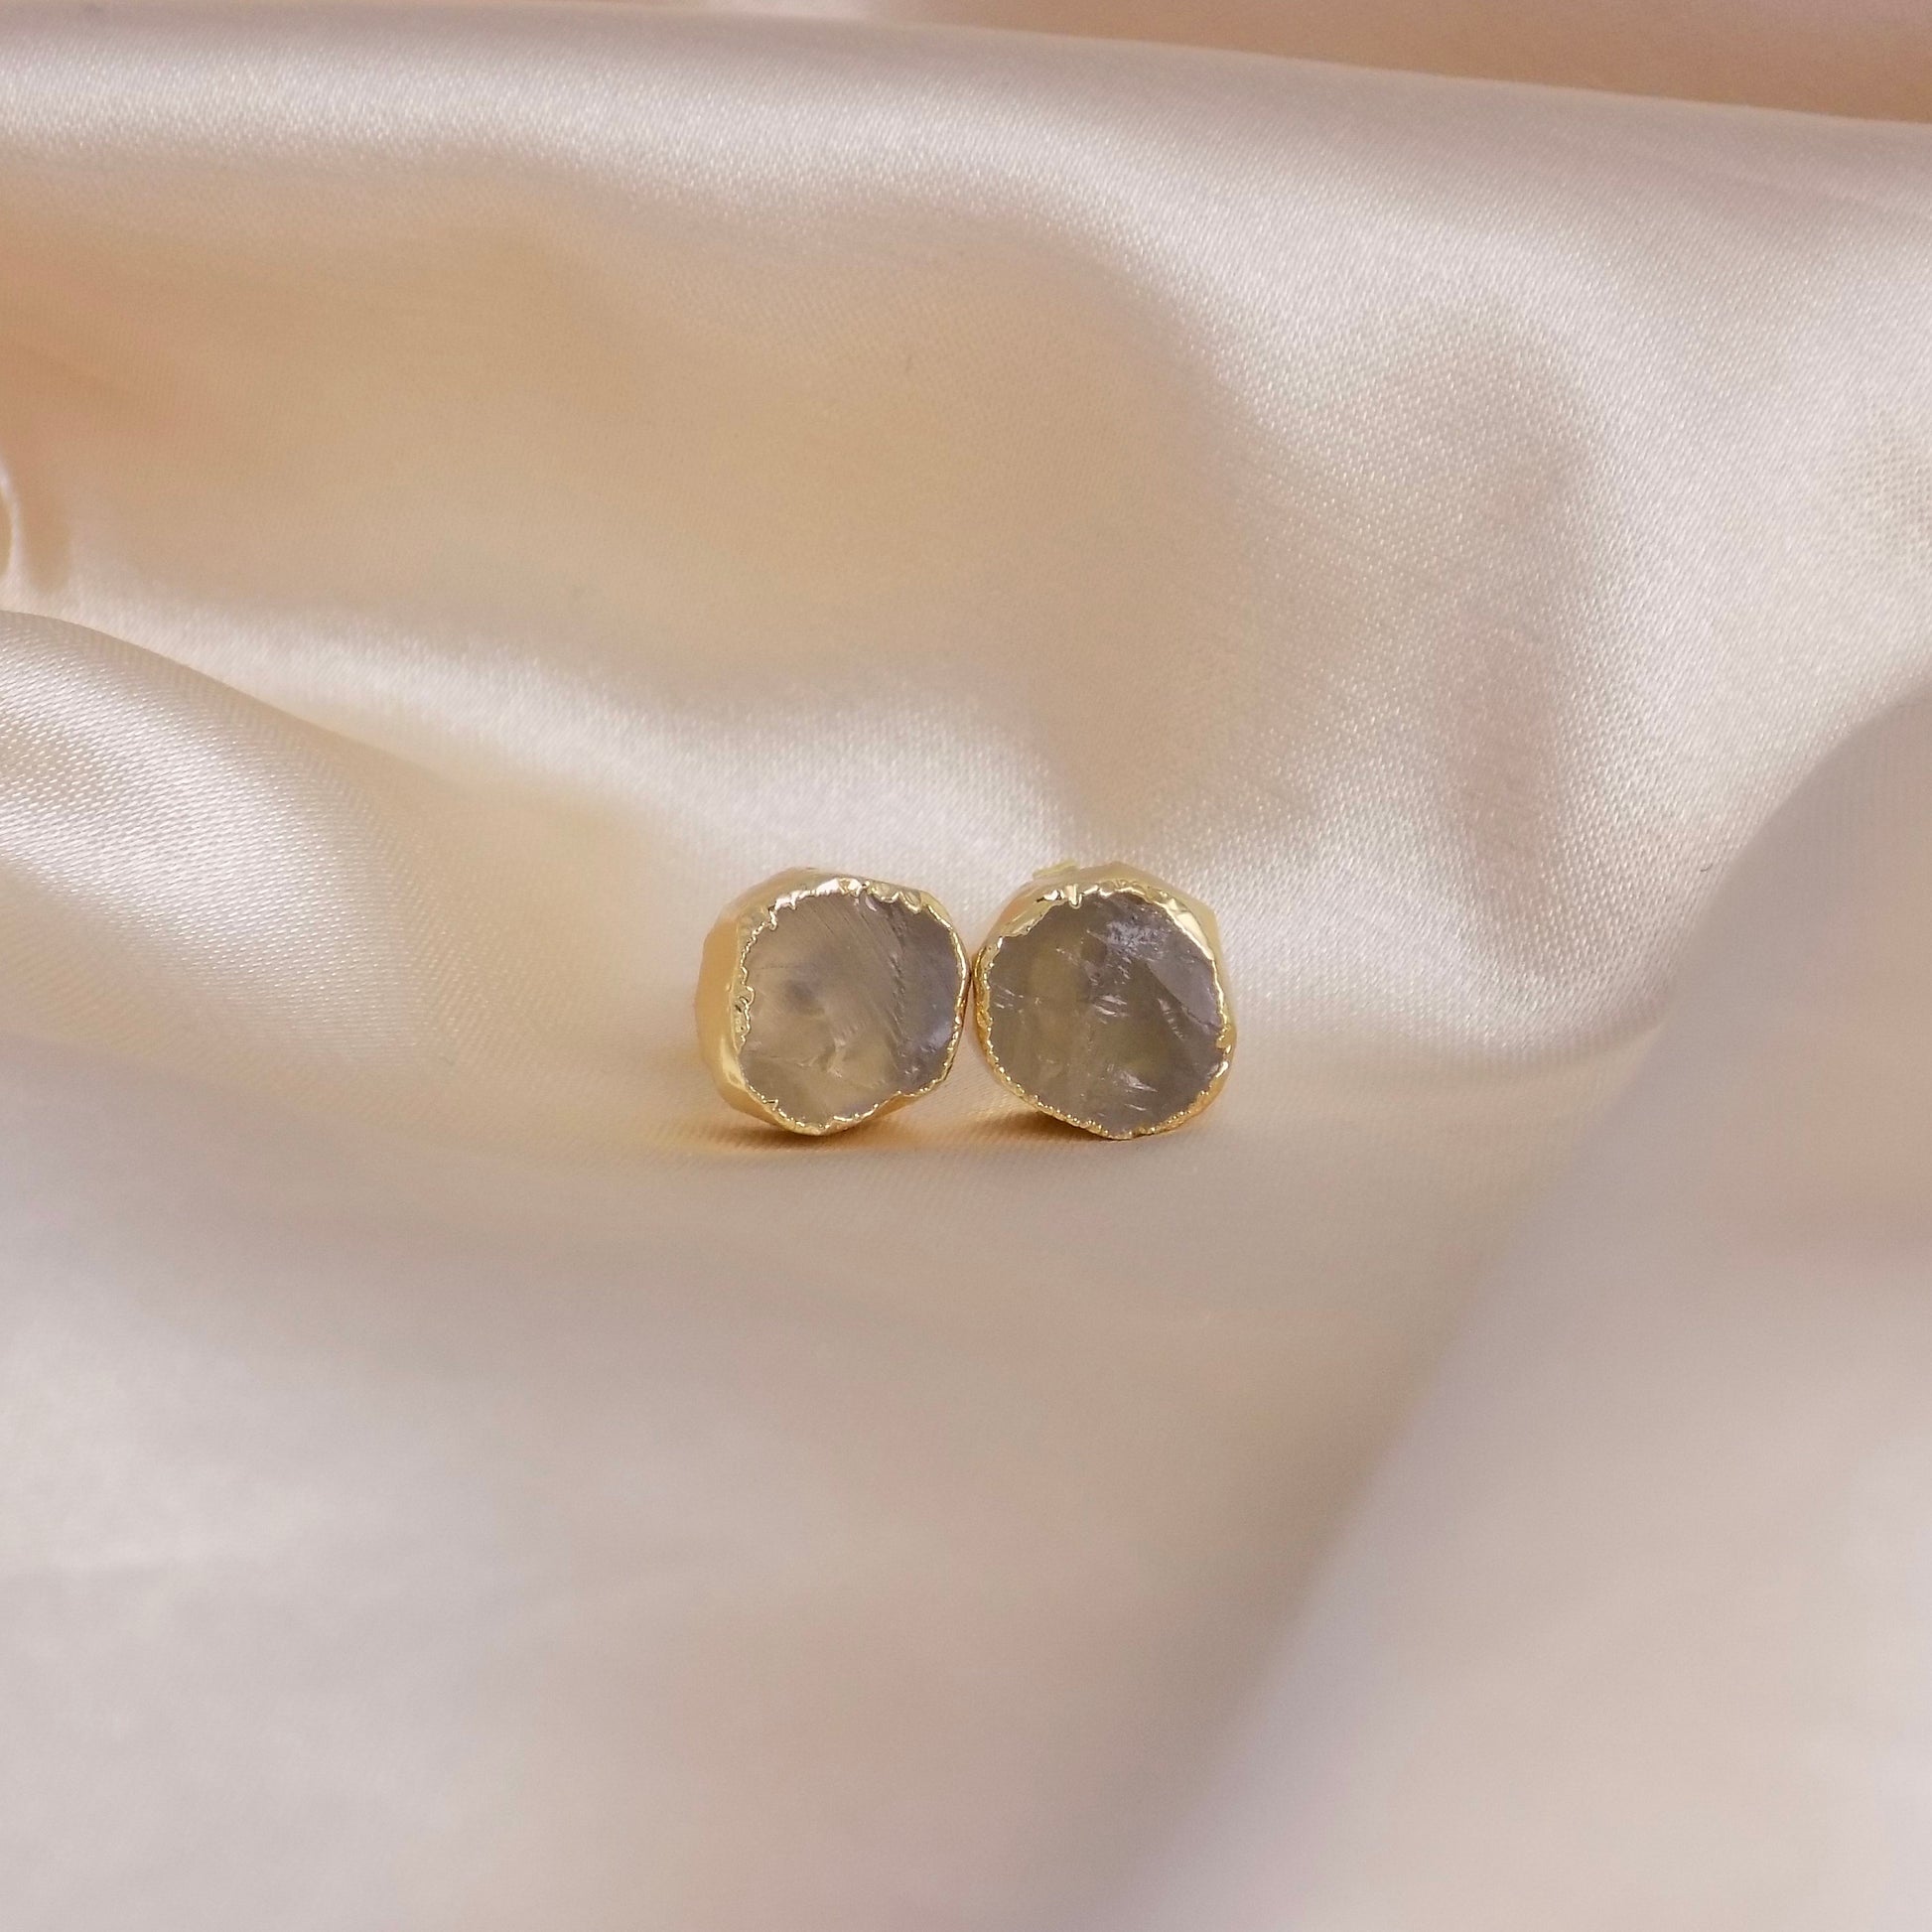 Citrine Earrings Studs Gold, Raw Crystal Earrings, Yellow Gemstone Stud Earring For Women, Gifts for Mom, M6-757